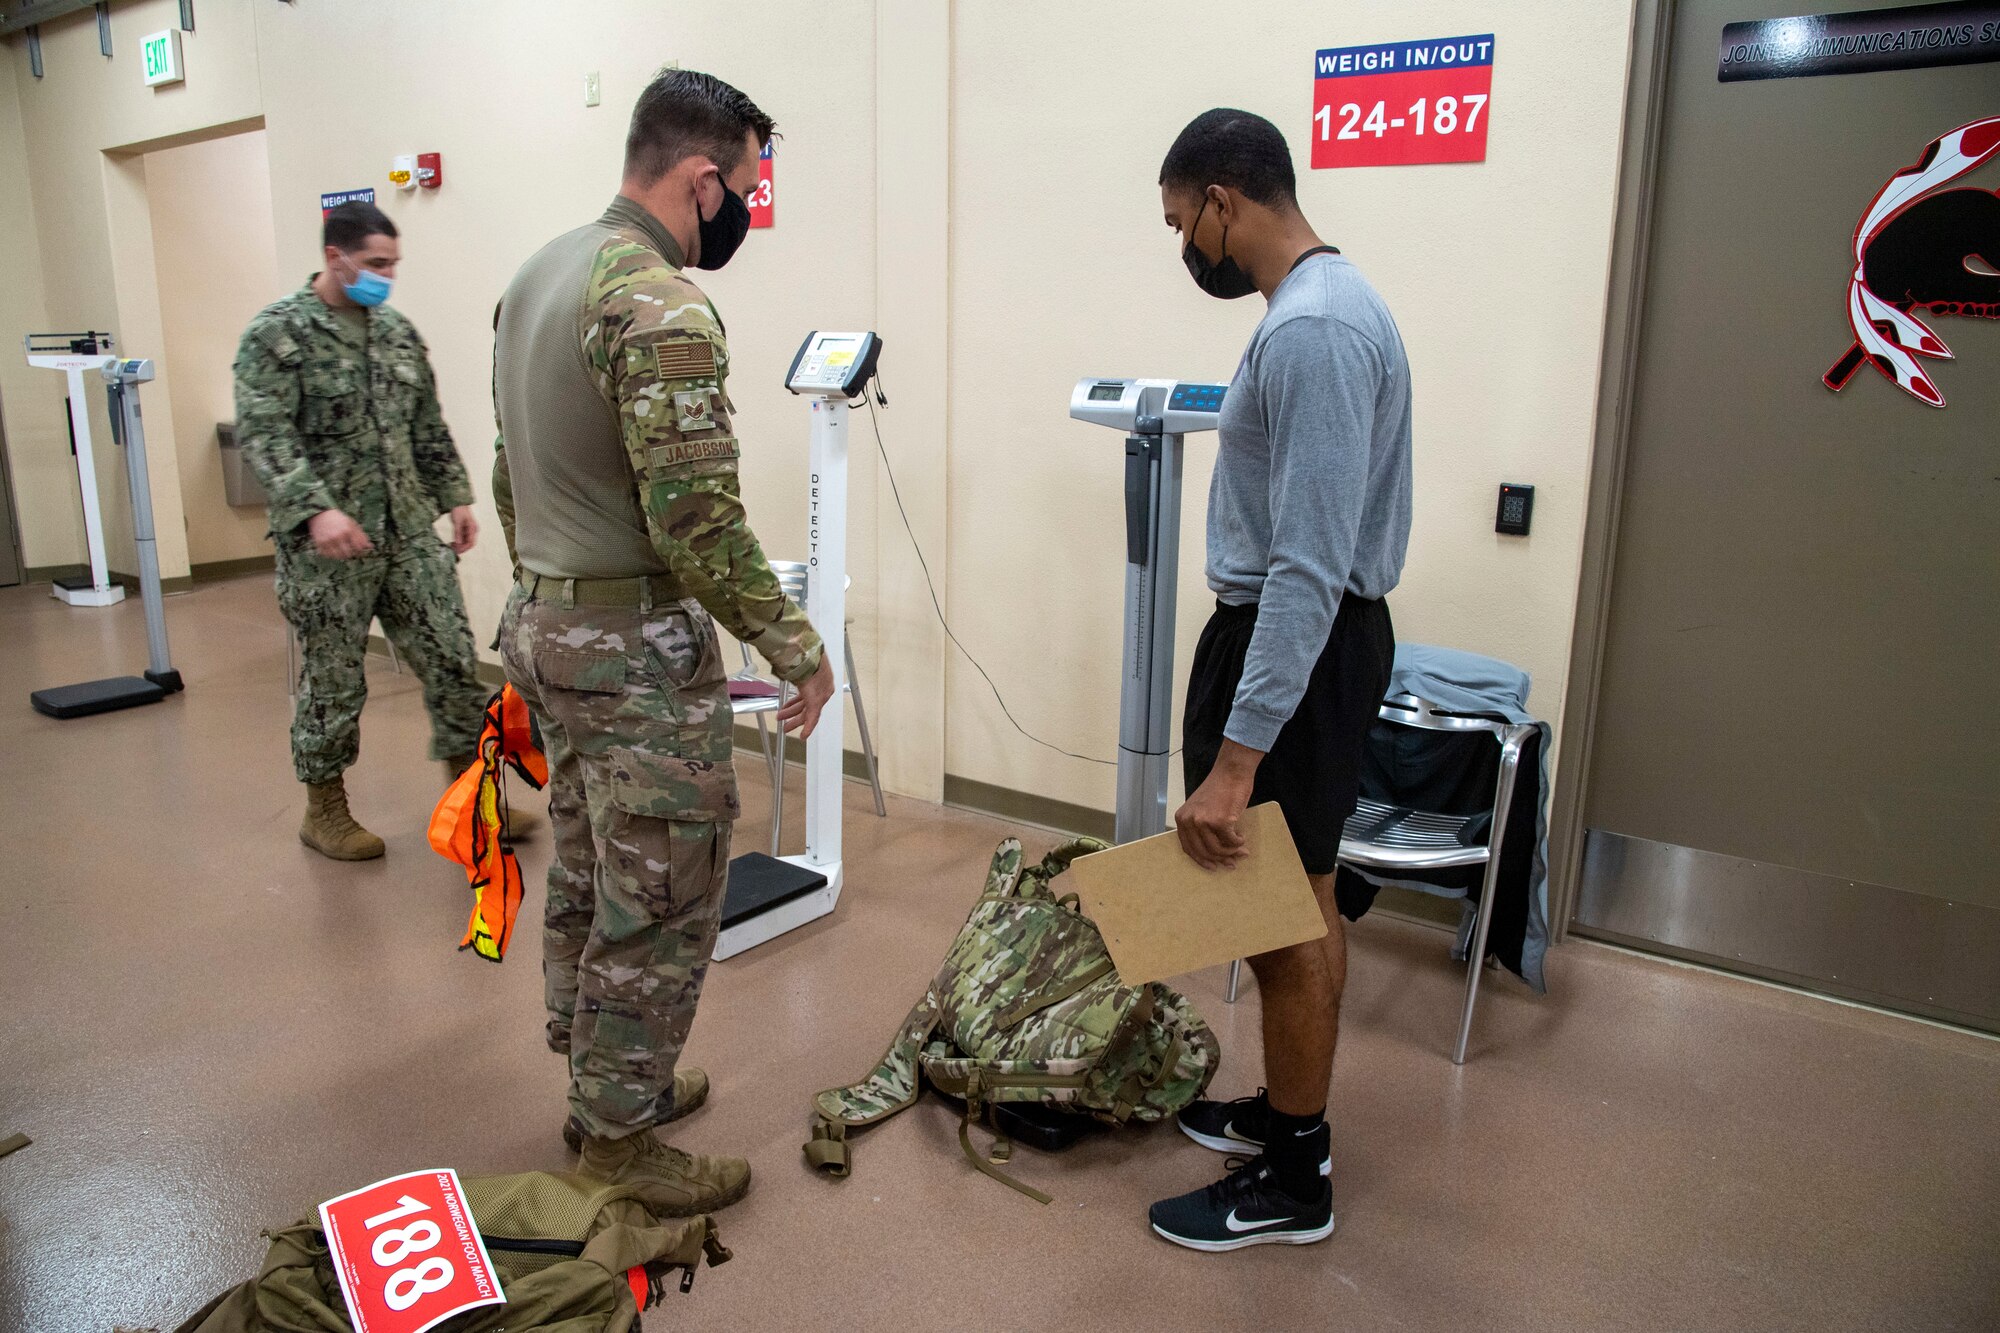 A member of the Joint Communications Support Element weighs his gear before starting the Norwegian Foot March on April 2, 2021, at MacDill Air Force Base, Fla.